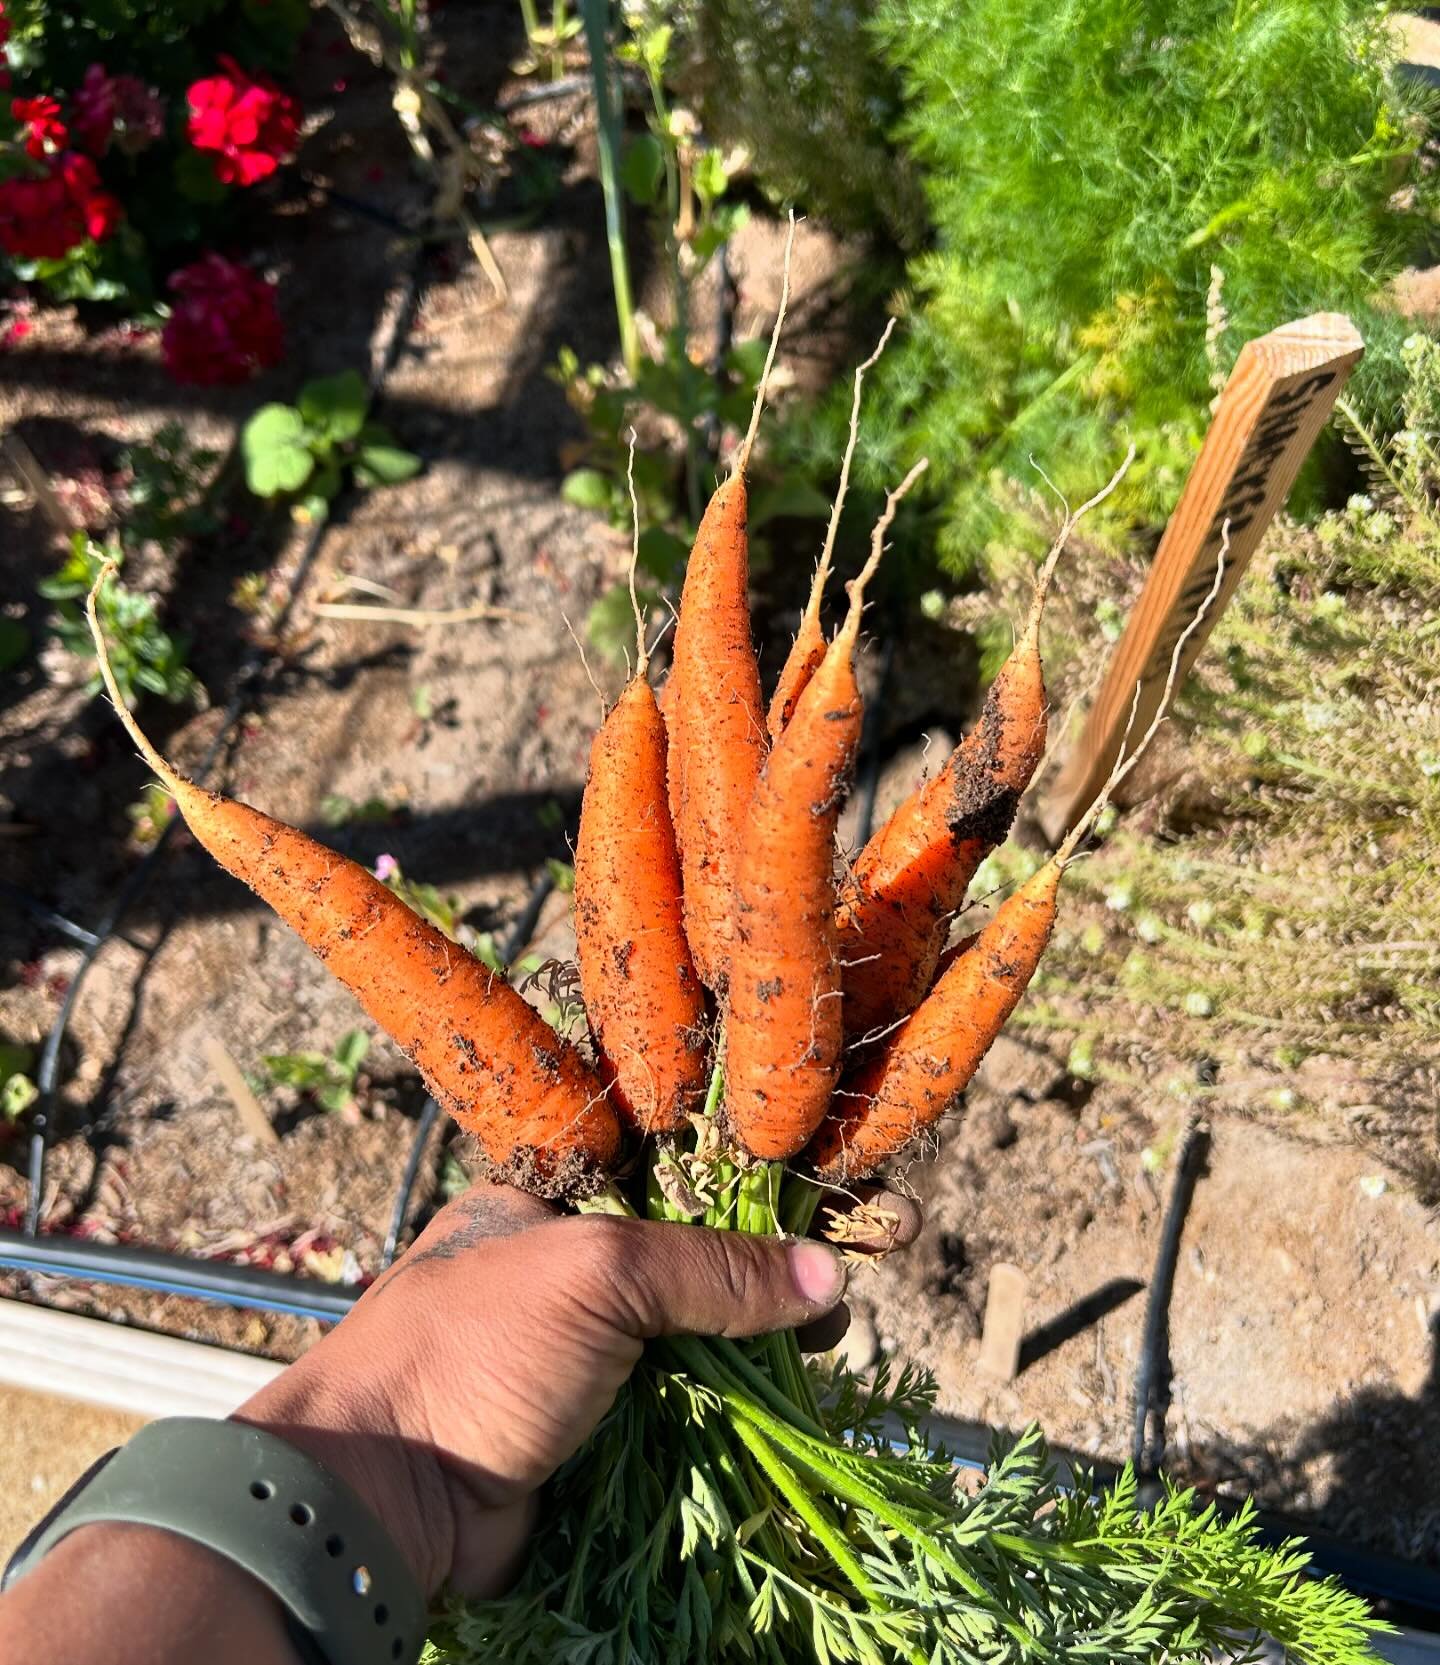 Happy Friday!
Grab your reusable bags and clippers and meet us at Garden Farms&rsquo; Community Garden inside of Craig Ranch Regional Park!

Wander the garden, consult our professional urban farmers, and harvest your own locally grown organic produce